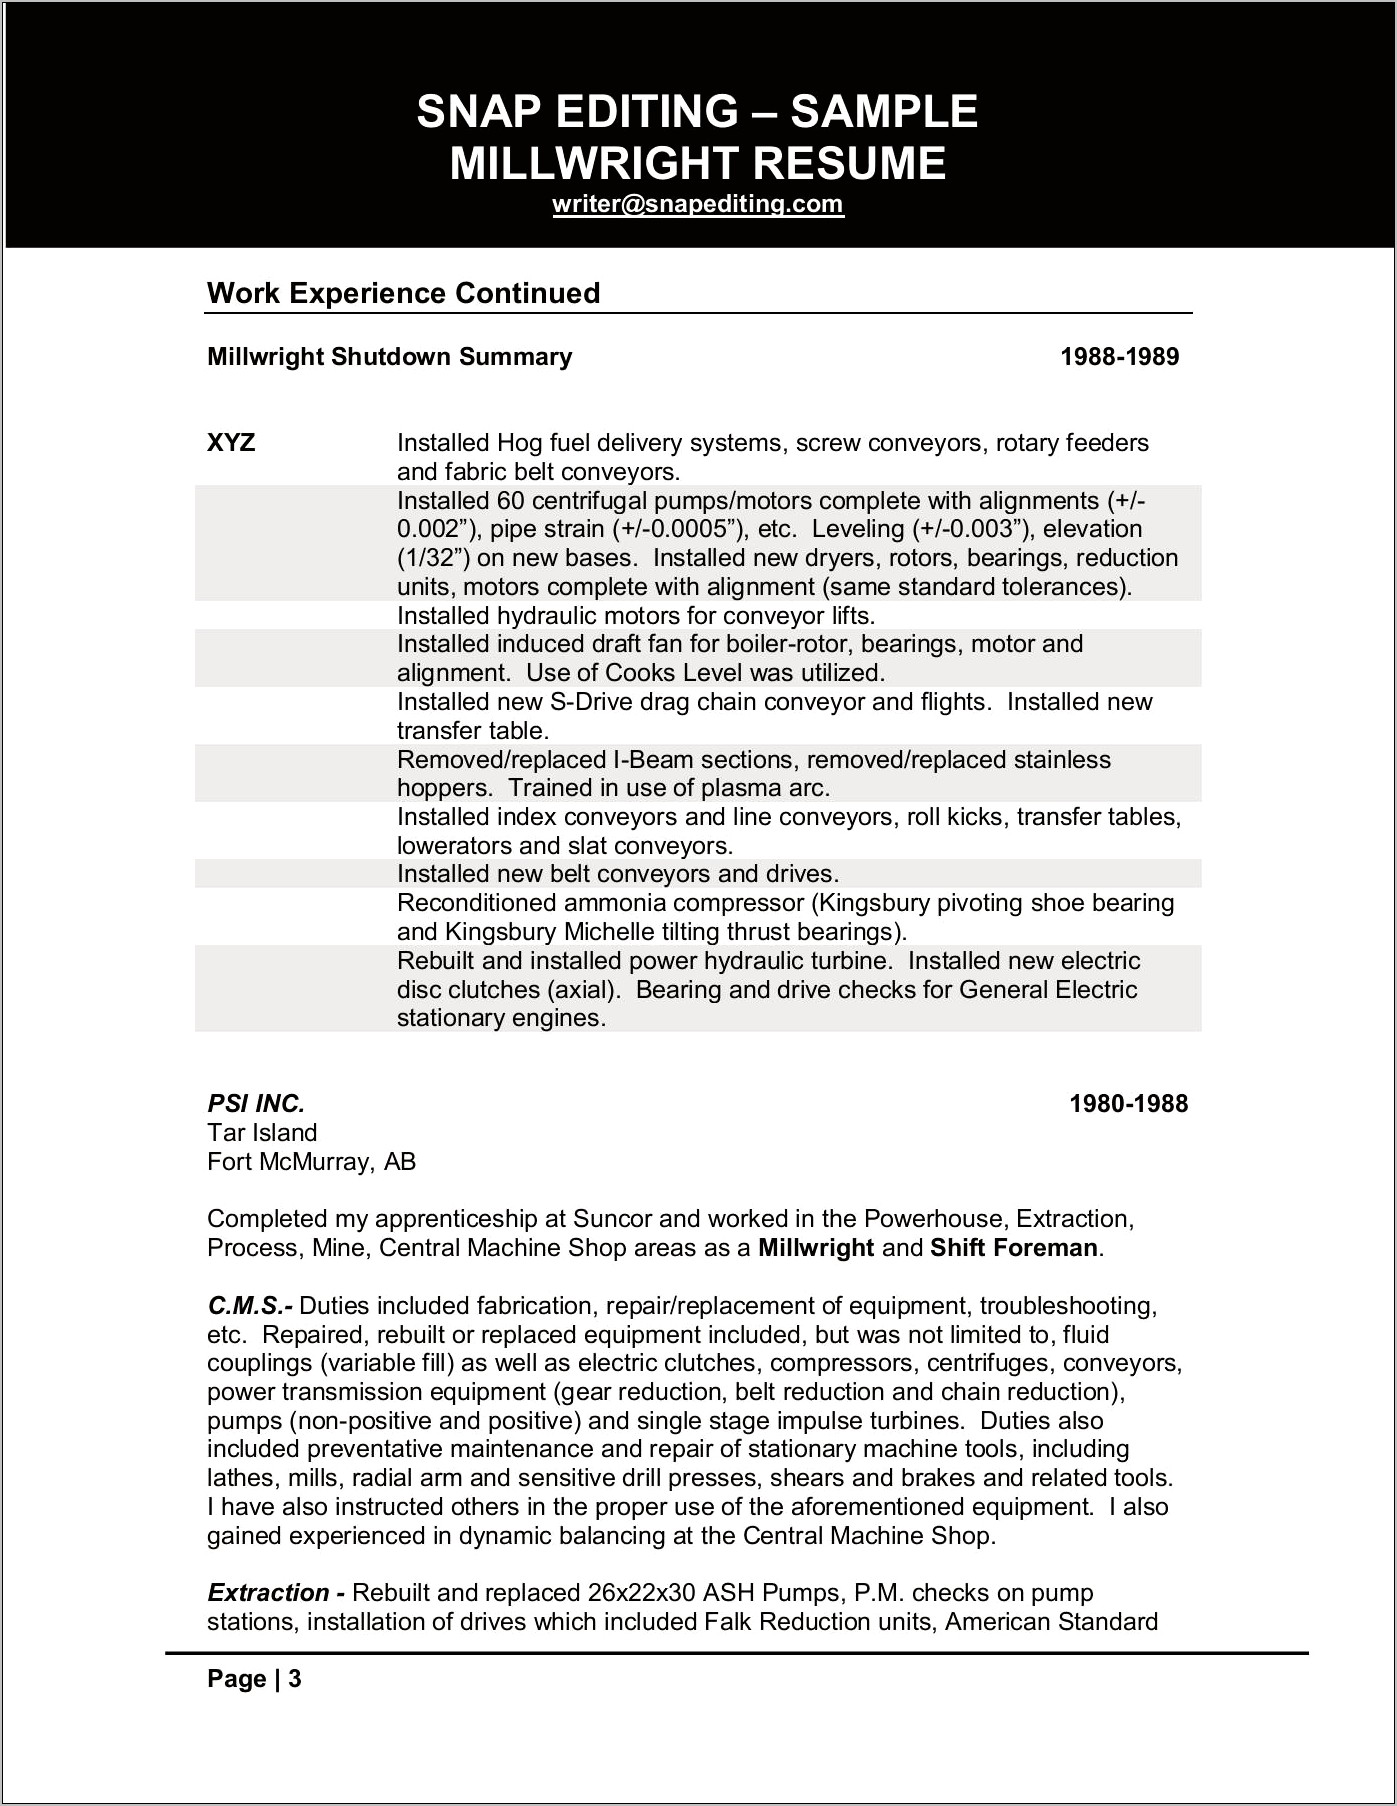 Resume Example For Mill Wright